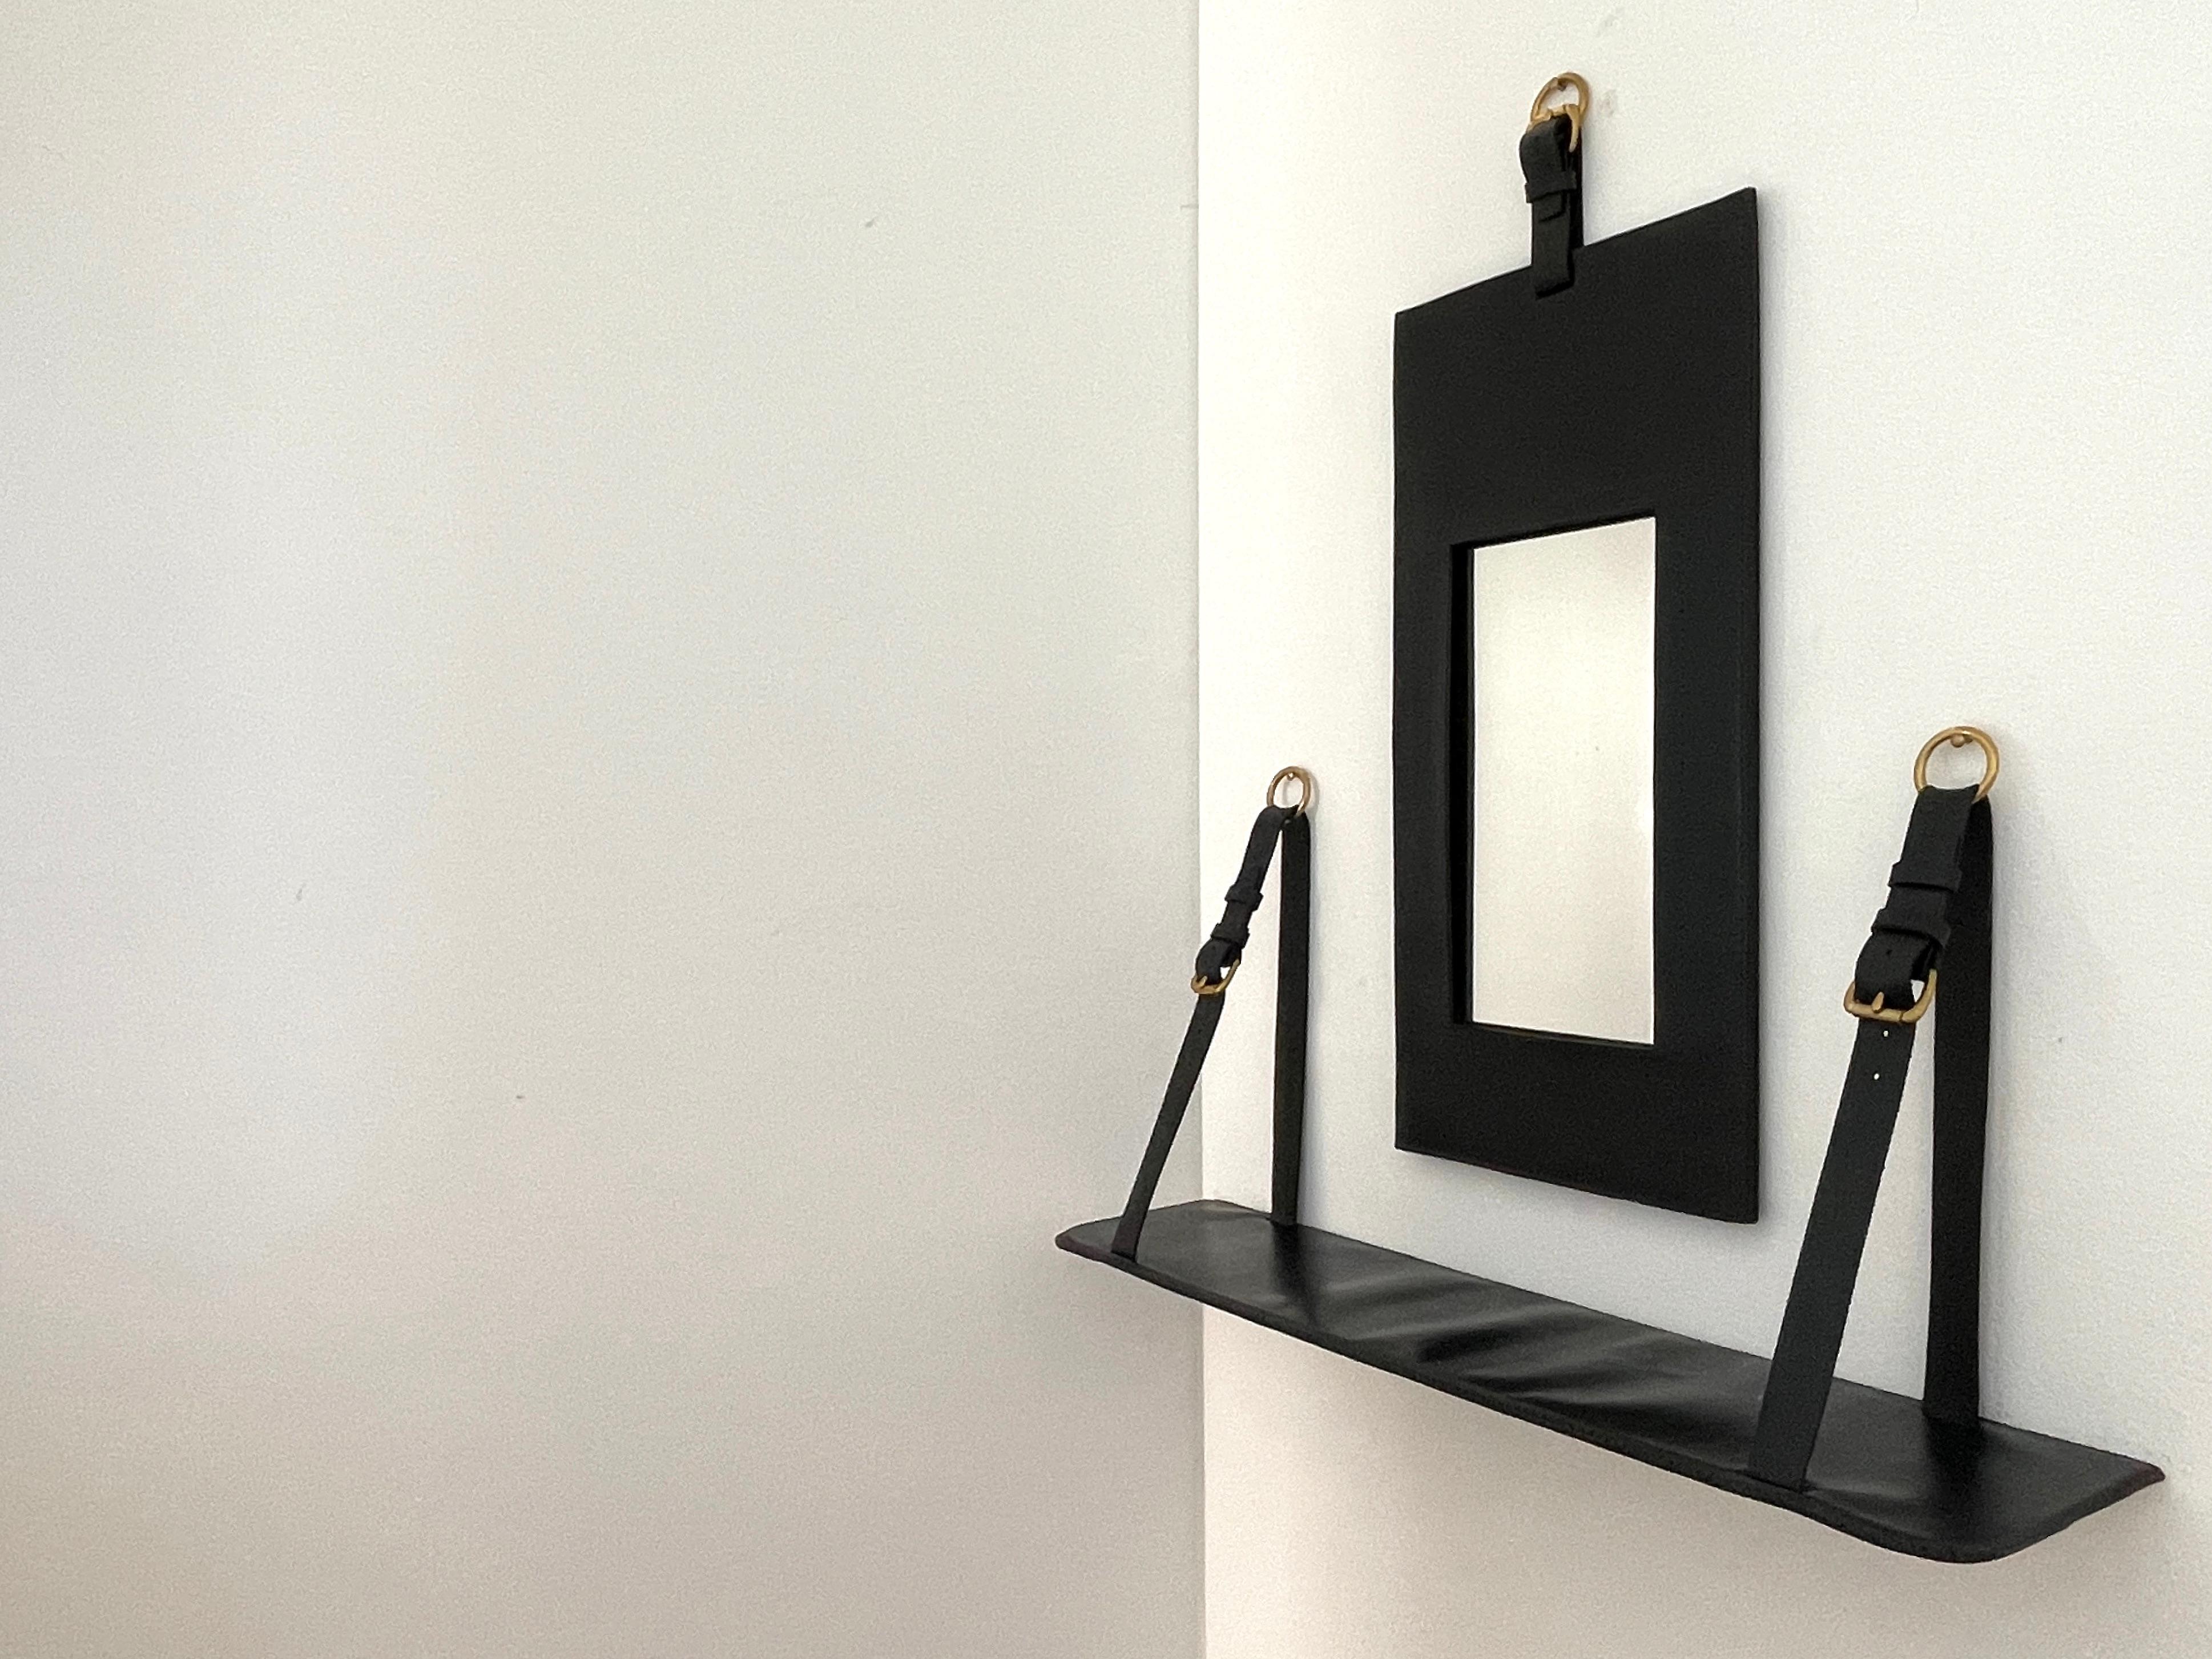 Jacques Adnet mirror and wall shelf.
Black leather framed mirror with black leather floating shelf.
Brass hardware.

Mirror - 11